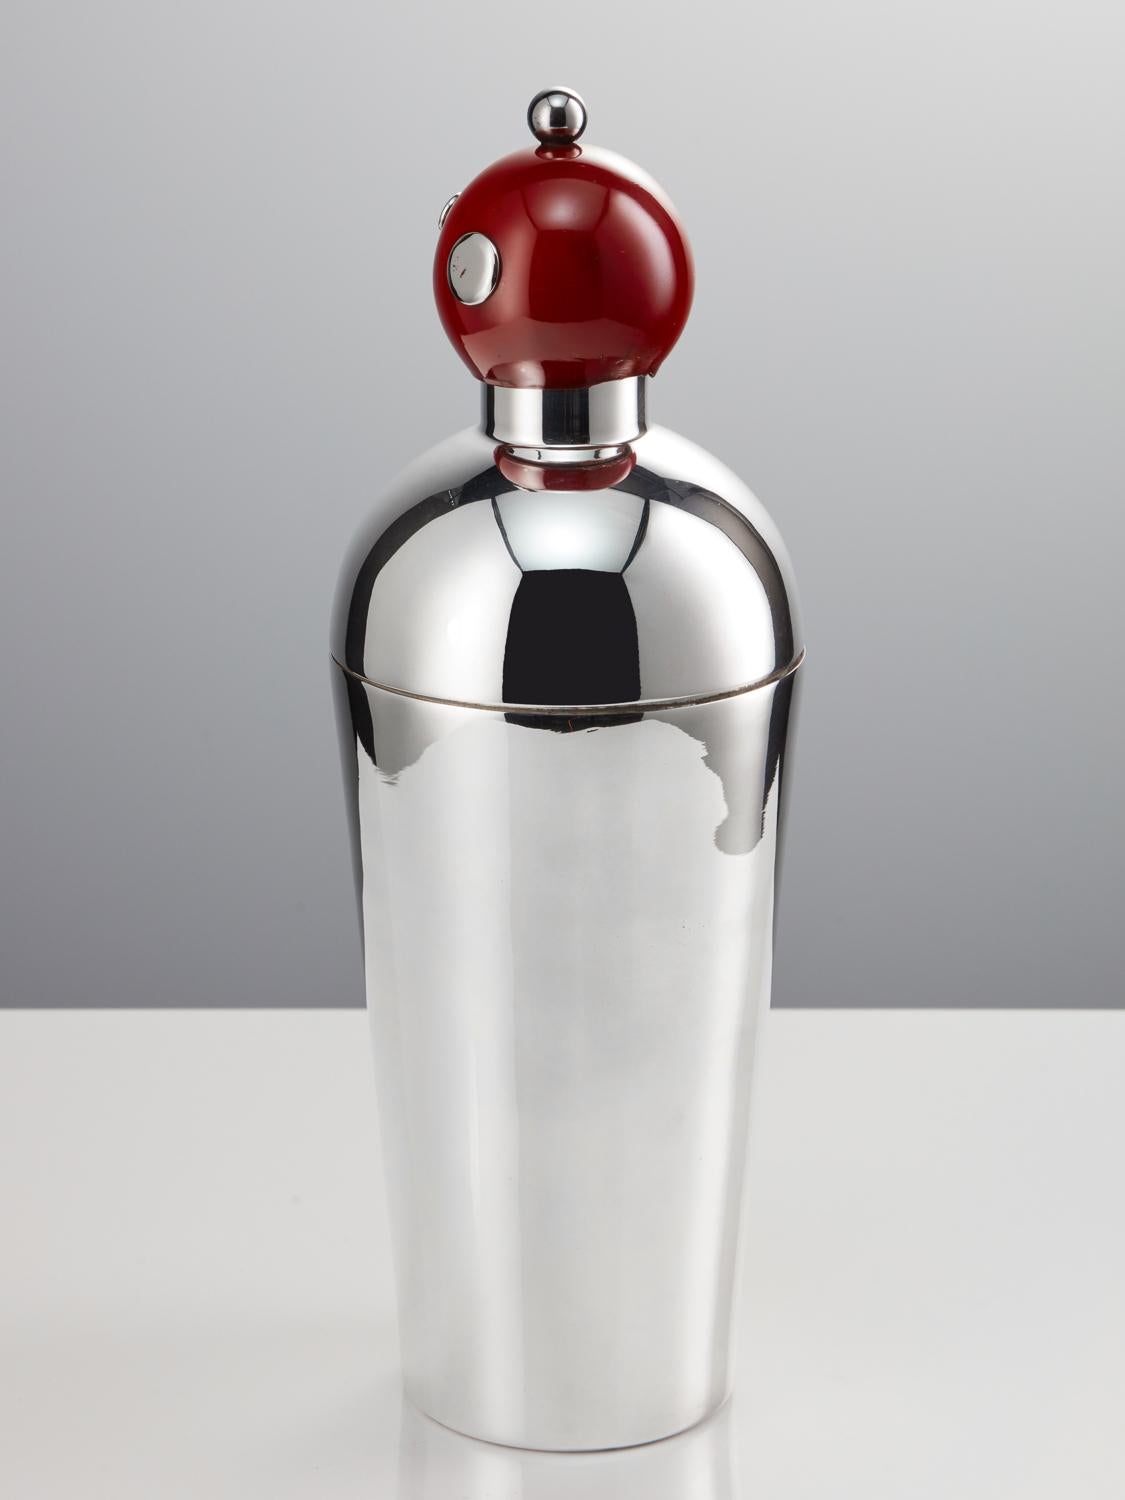 A great piece, late 20th century novelty cocktail shaker in the form of a Robot, with clown button features, Circa 1970.

Upon purchasing this item it was described as a Clown Robot, either way both expressions work well to describe the shaker.
The